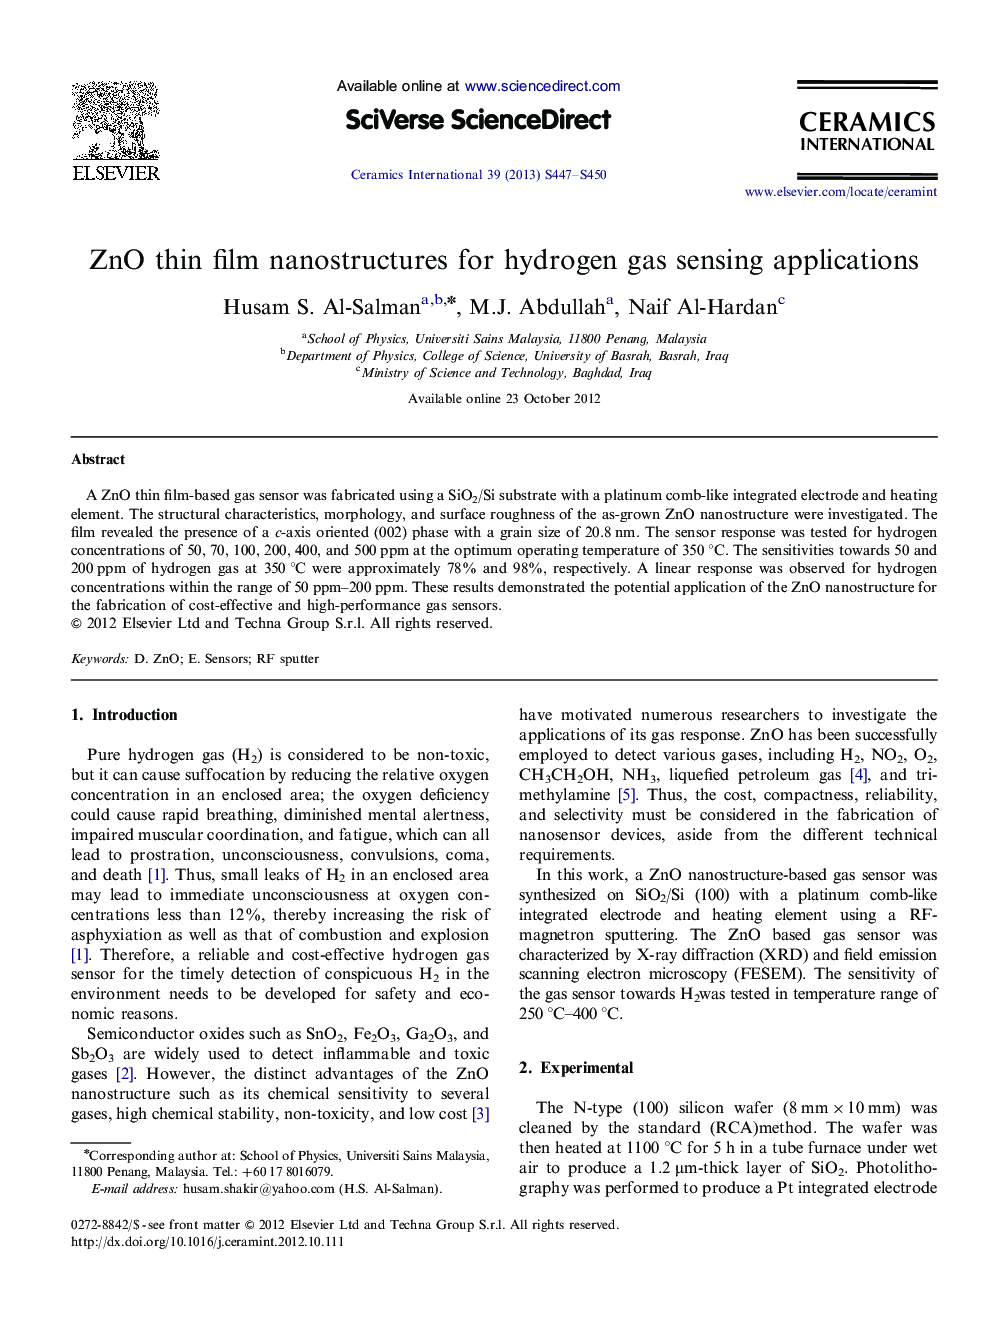 ZnO thin film nanostructures for hydrogen gas sensing applications